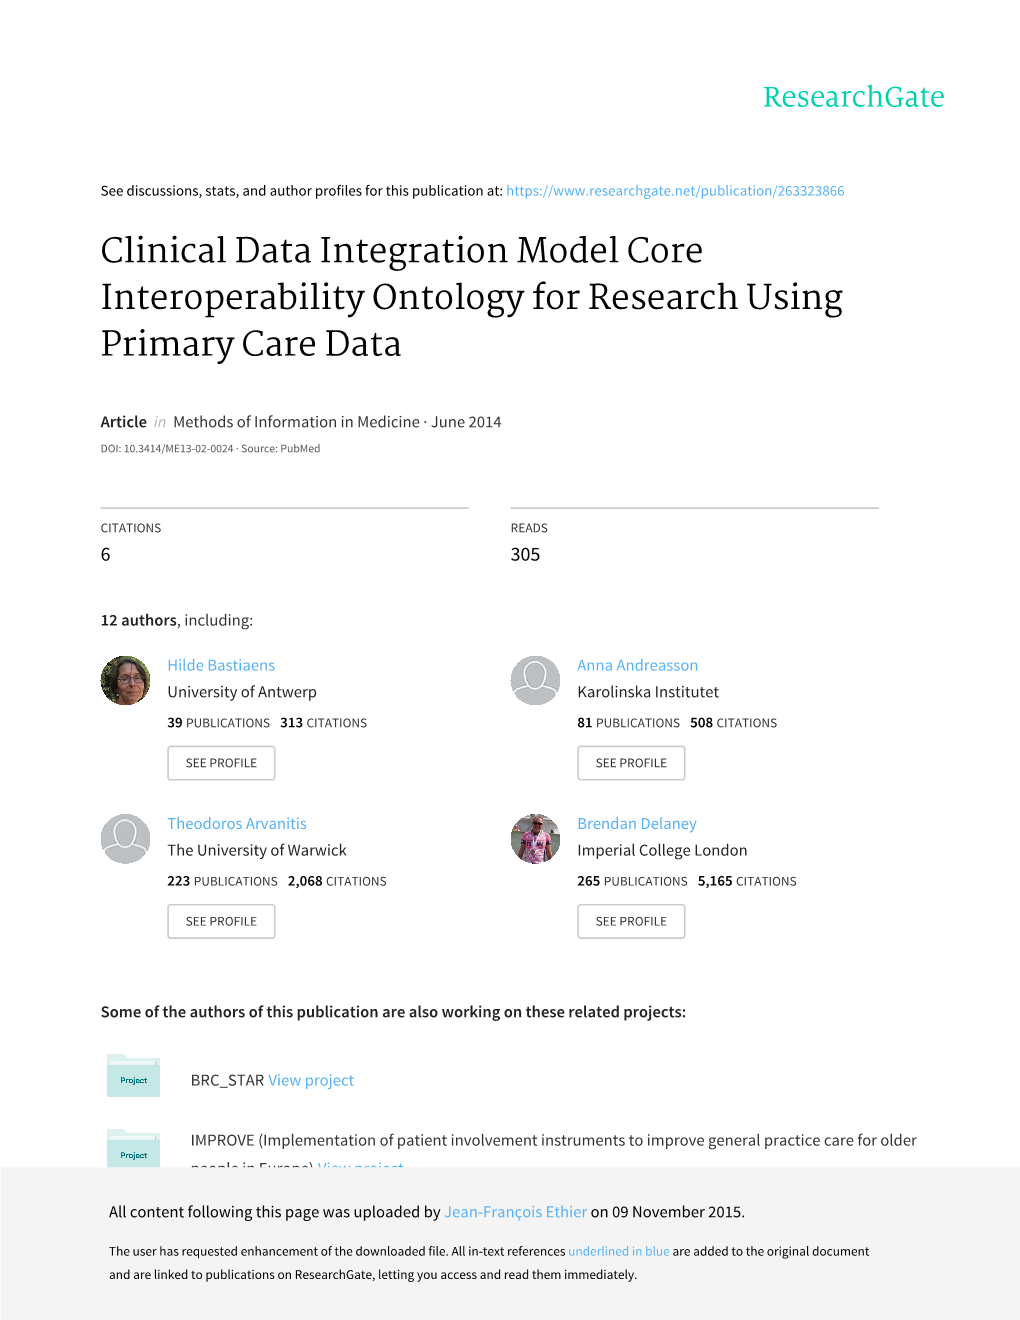 Clinical Data Integration Model Core Interoperability Ontology for Research Using Primary Care Data